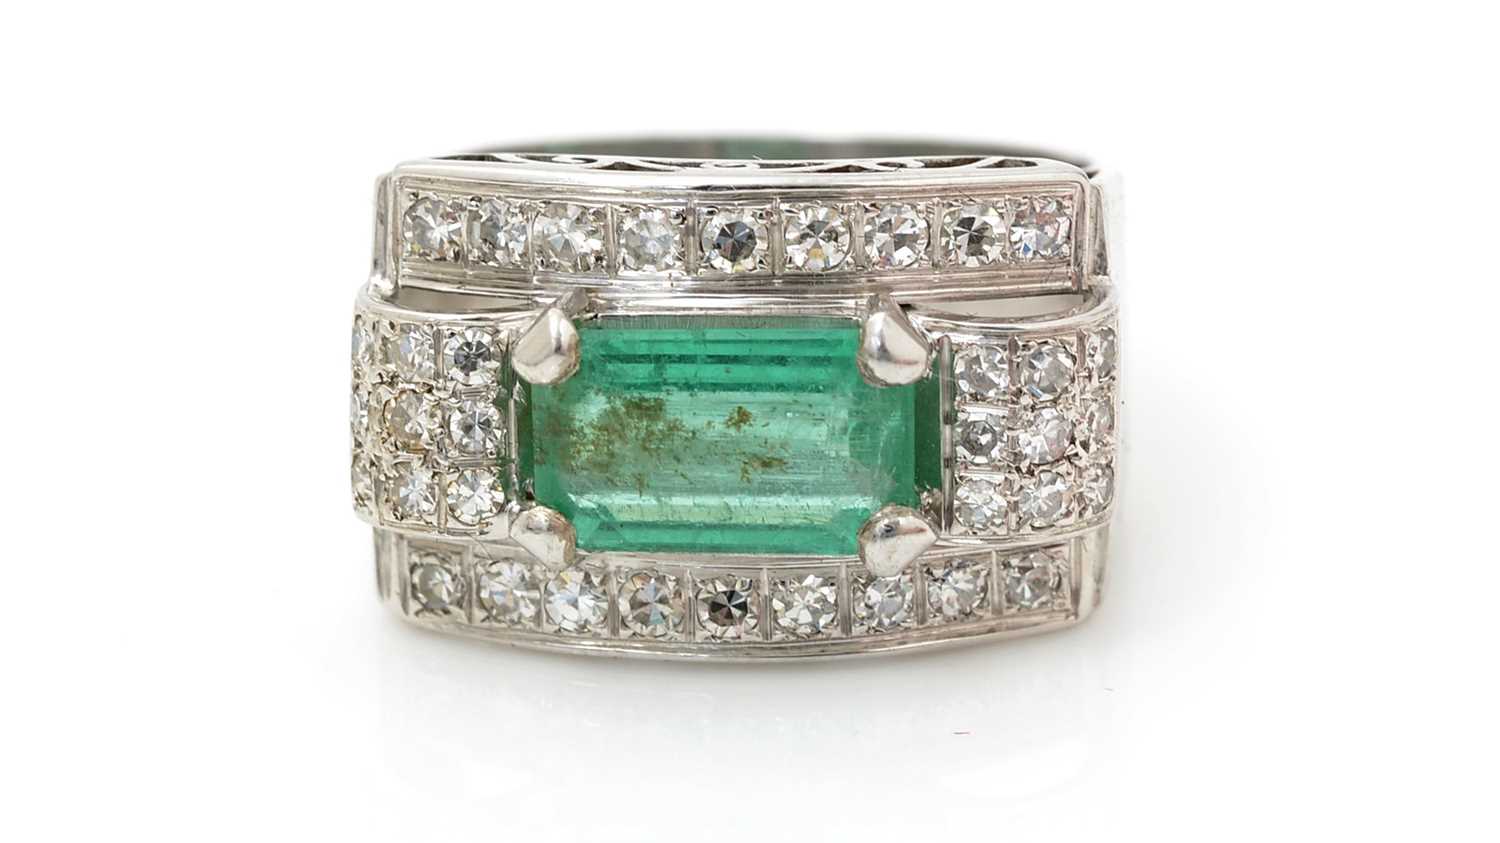 Lot 508 - An emerald and diamond Art Deco style ring